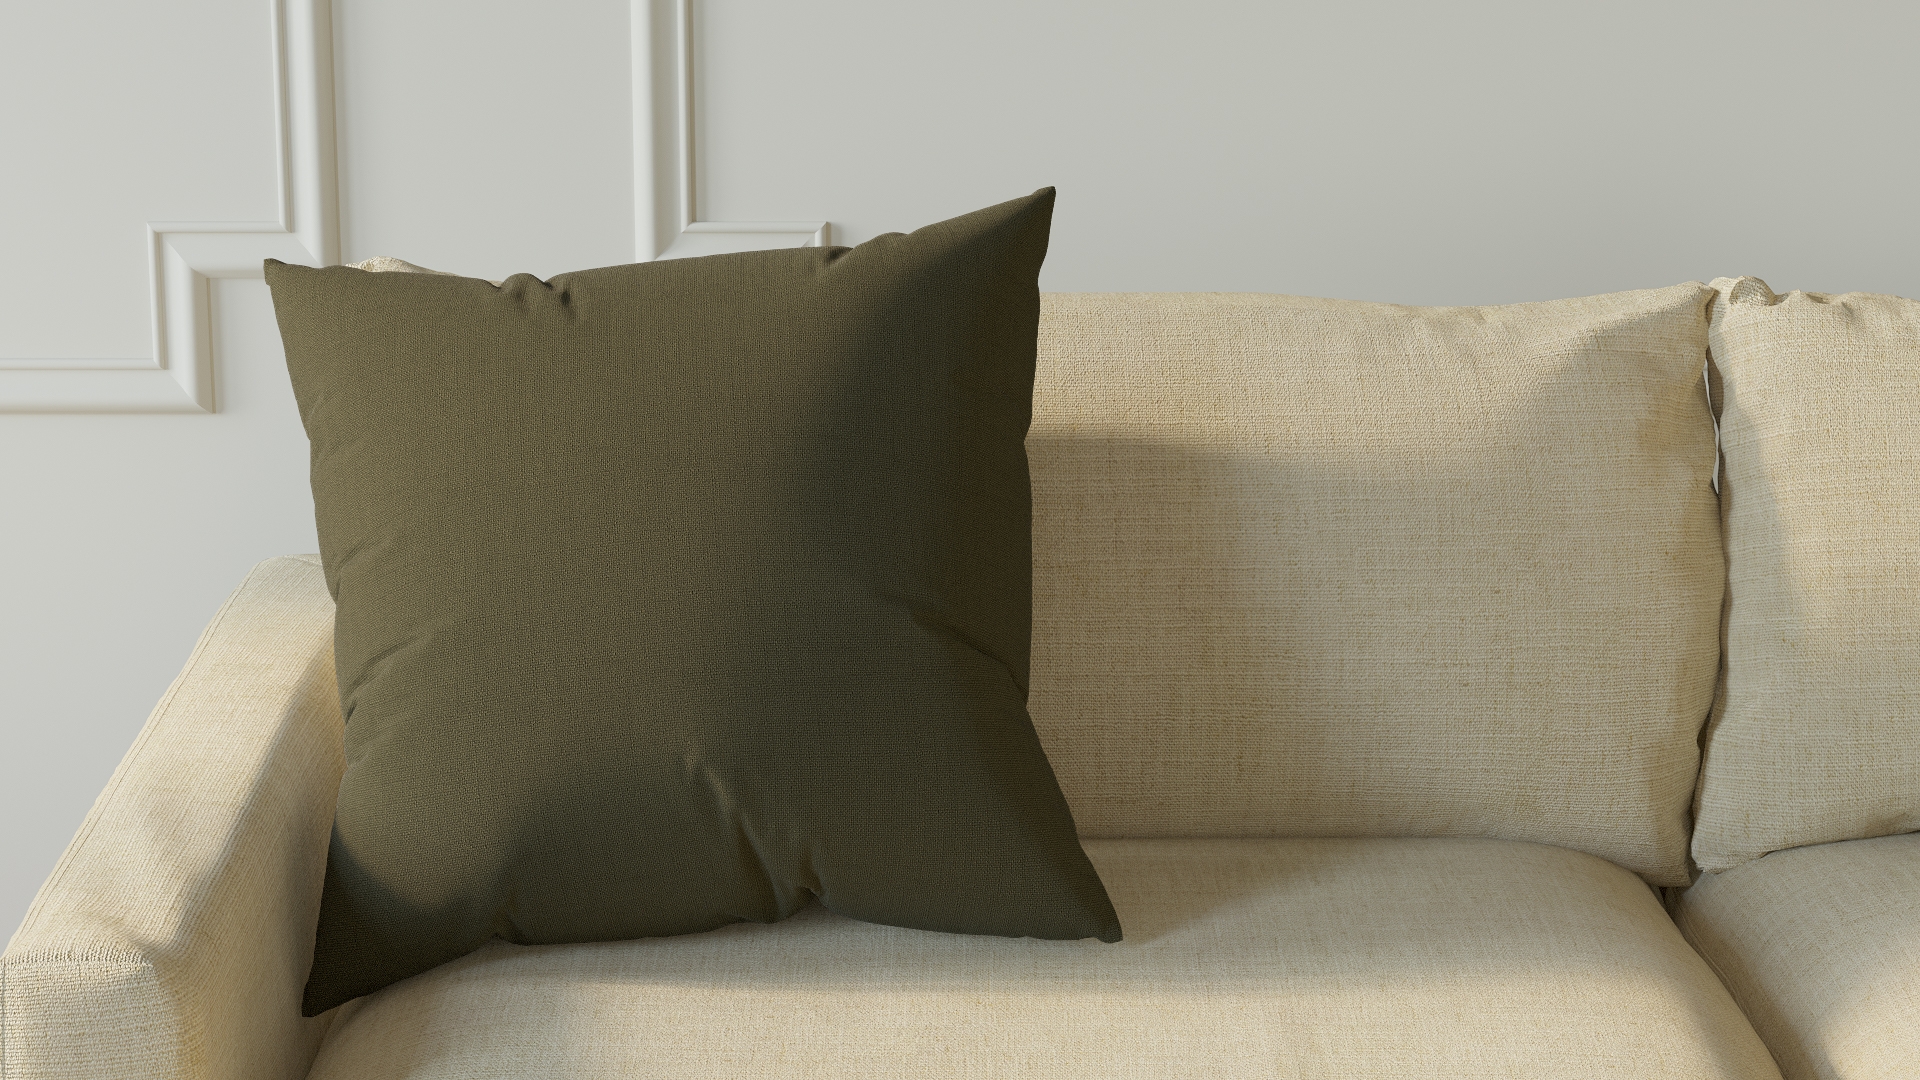 Throw Pillow 22", Olive Everyday Linen, 22" x 22" - Image 2